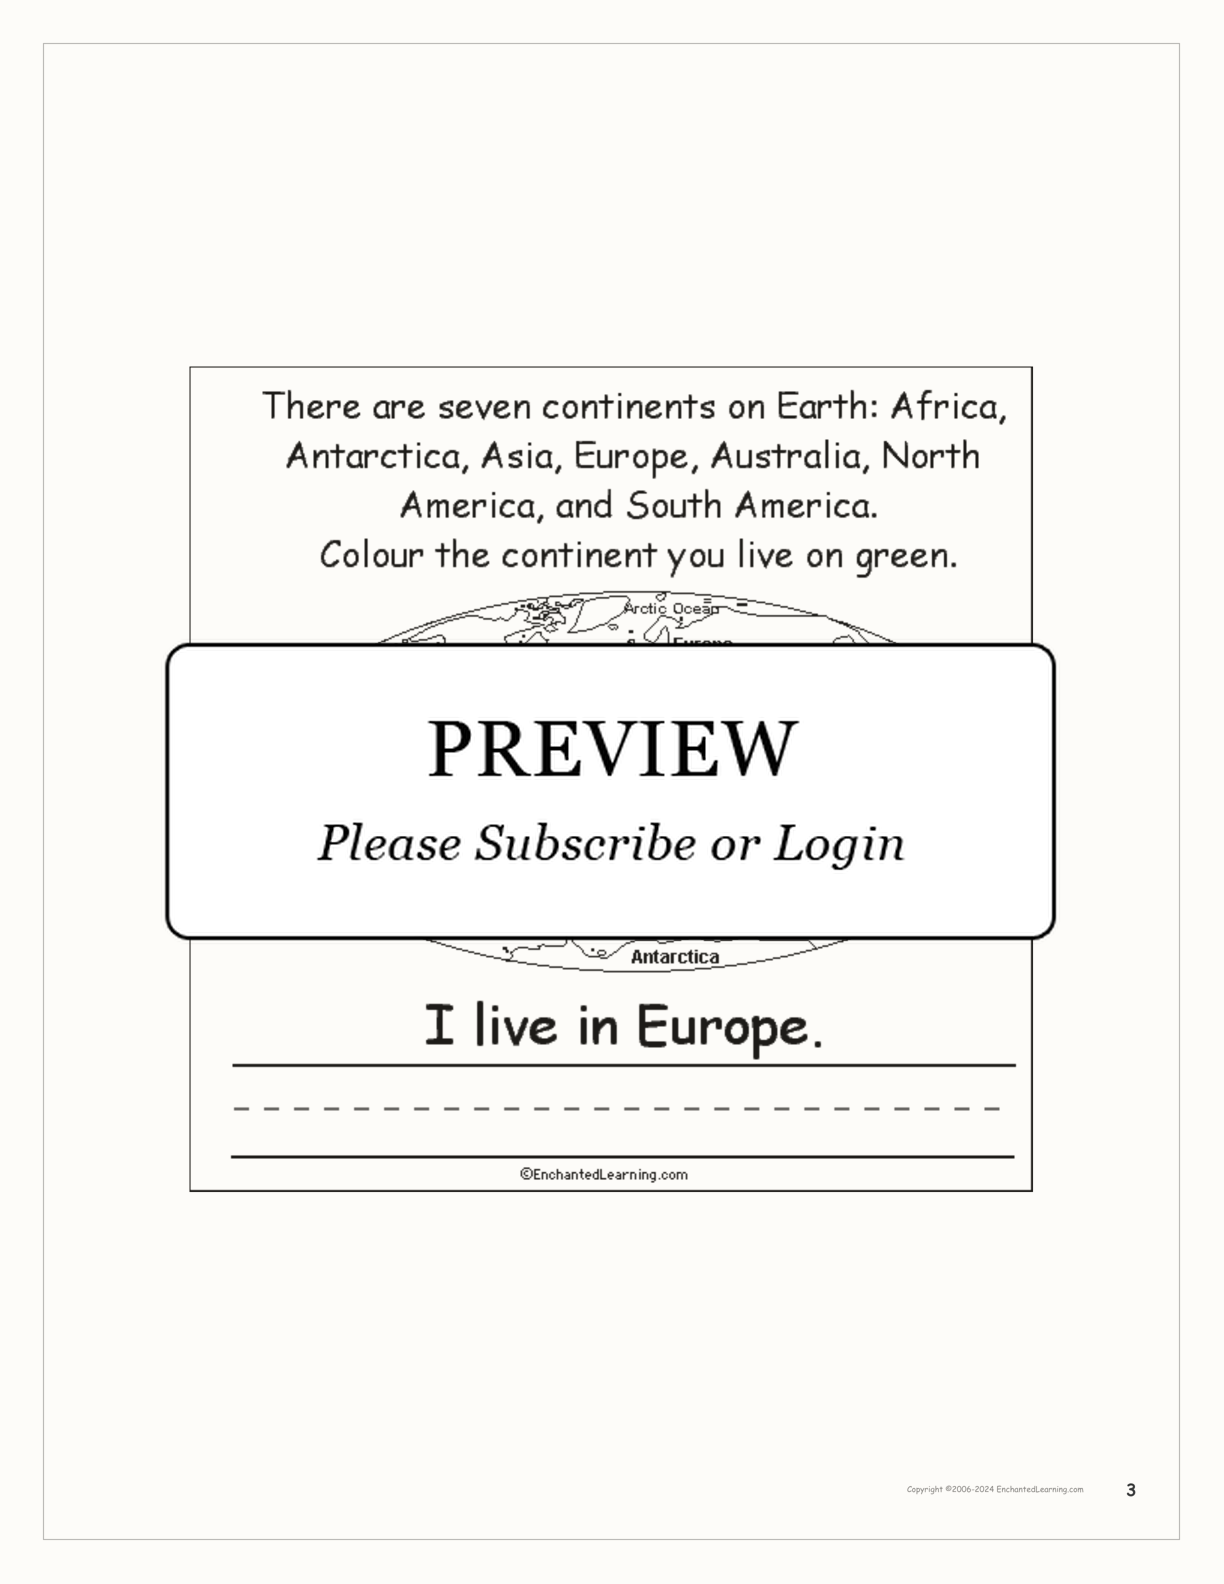 Where I Live: Europe interactive worksheet page 3